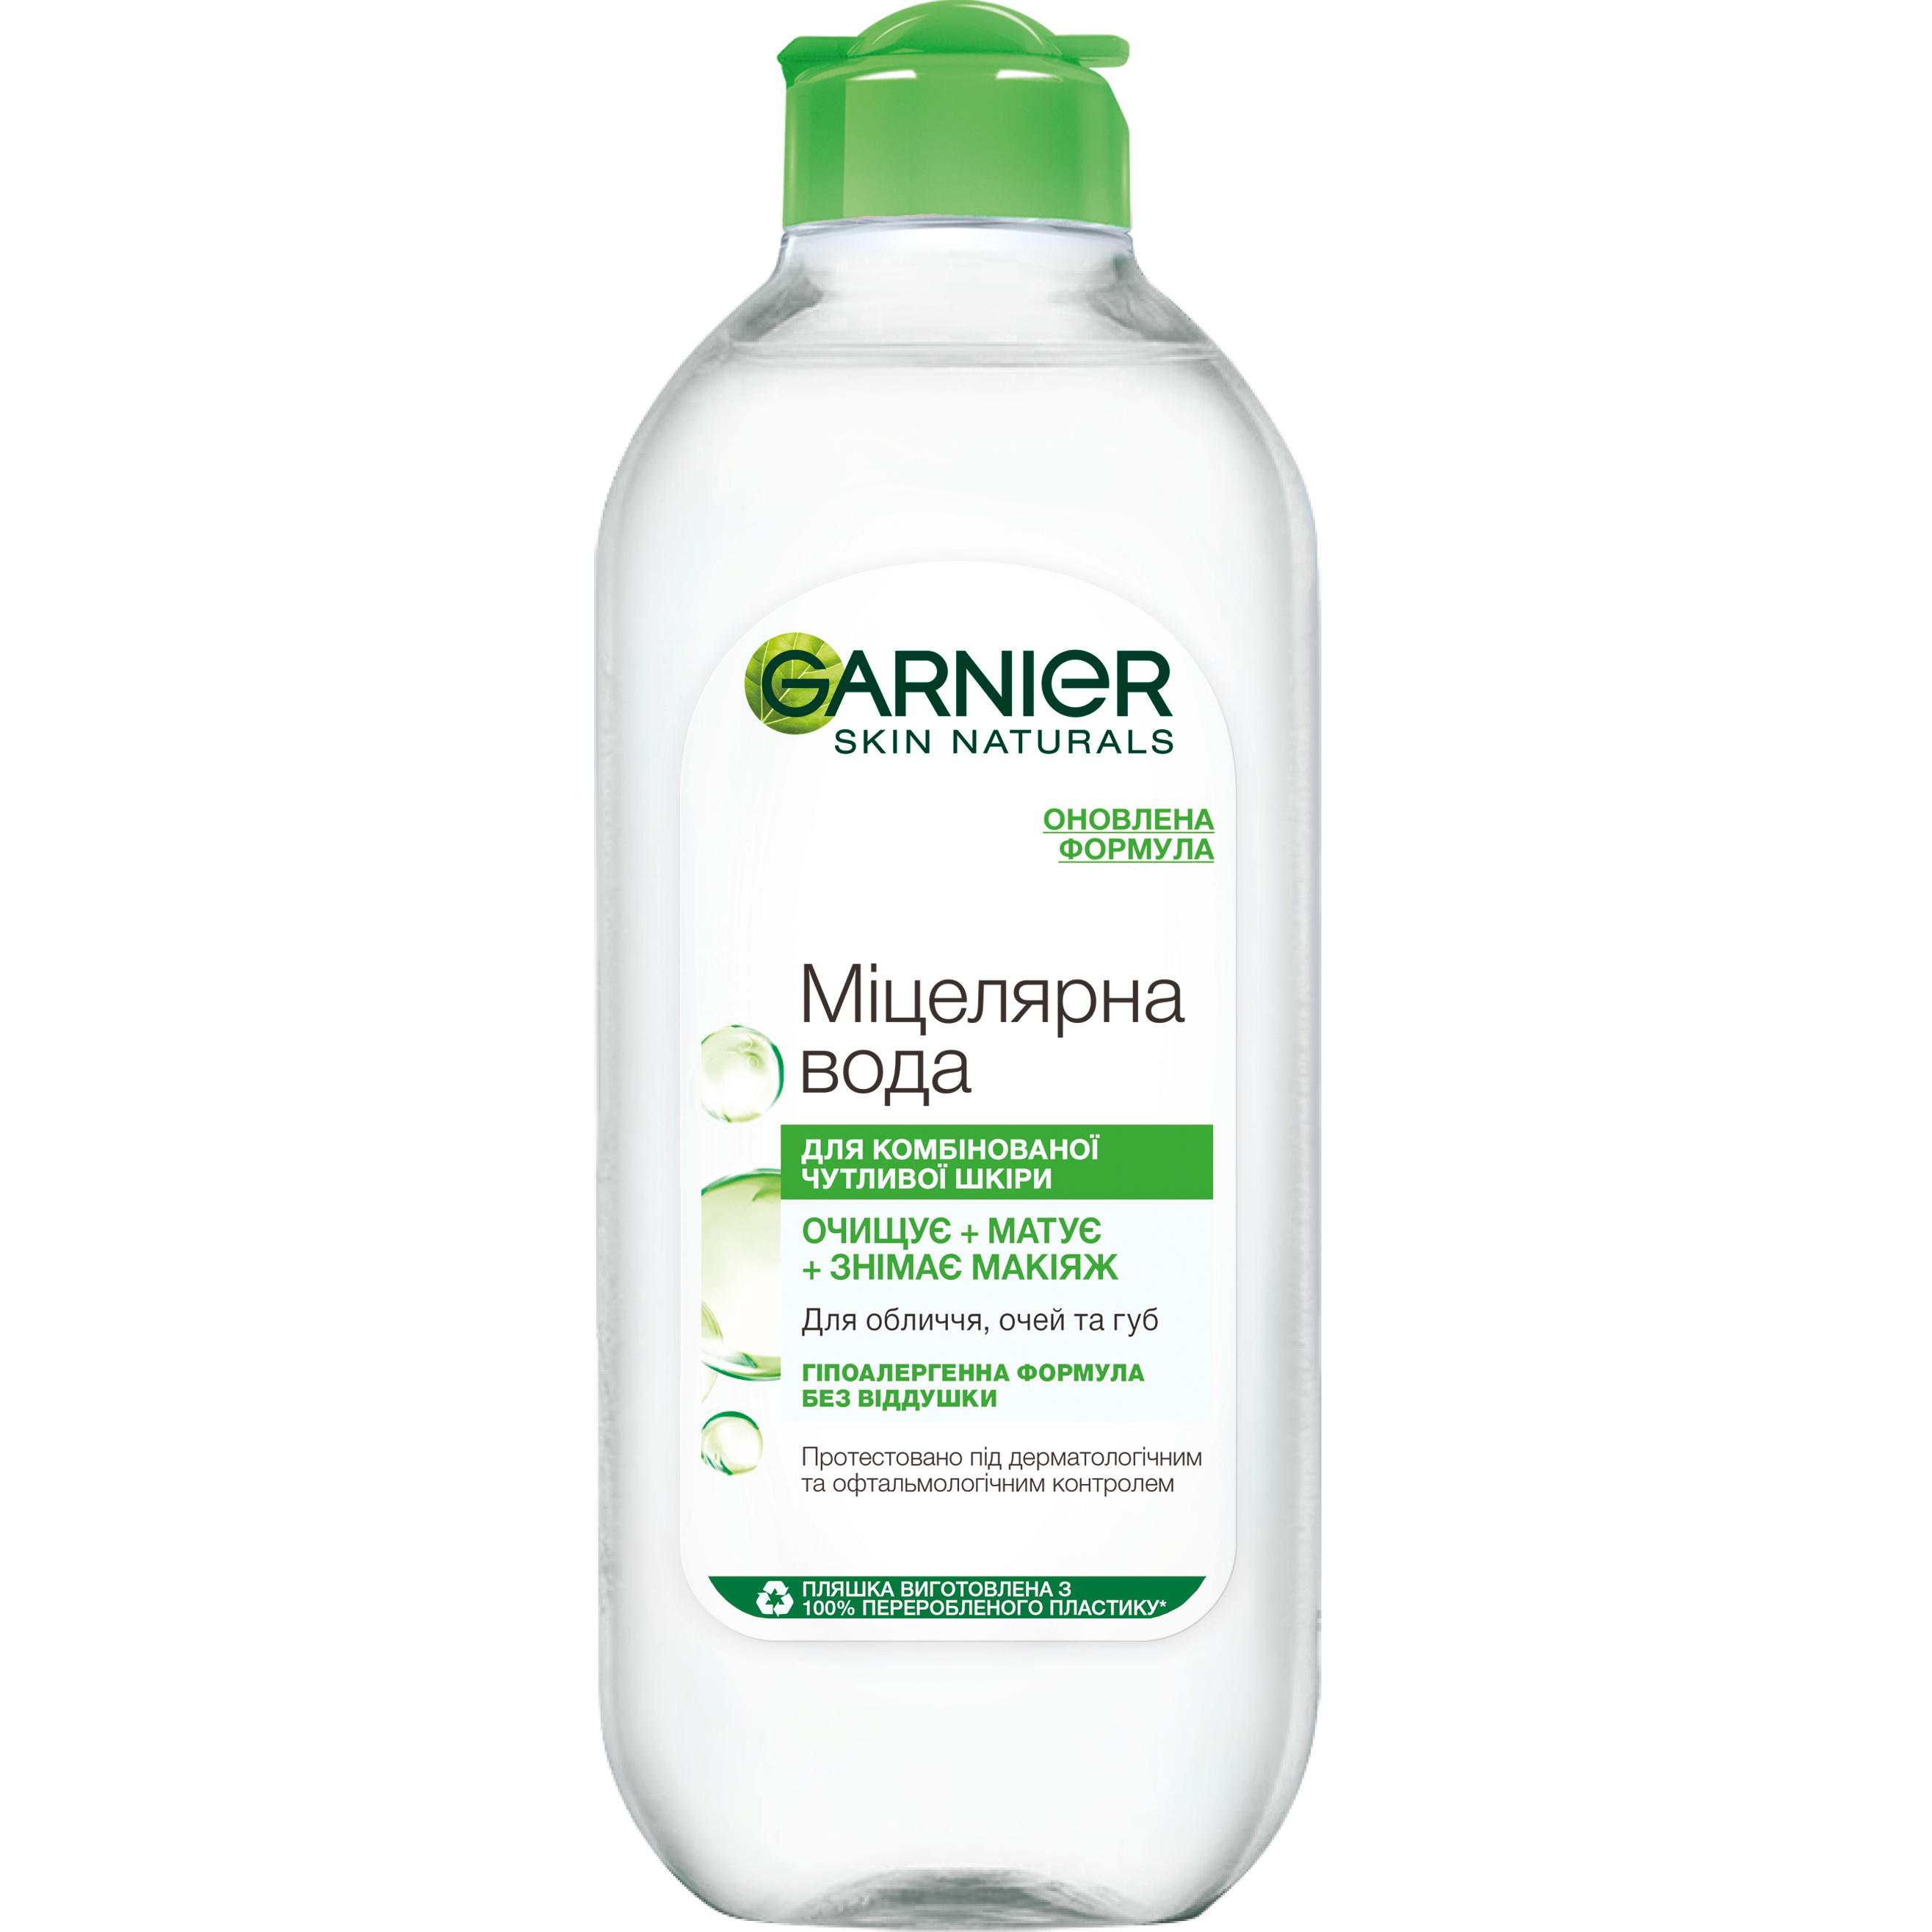 Photos - Facial / Body Cleansing Product Garnier Міцелярна вода  Skin Naturals, 400 мл  (C5311201)